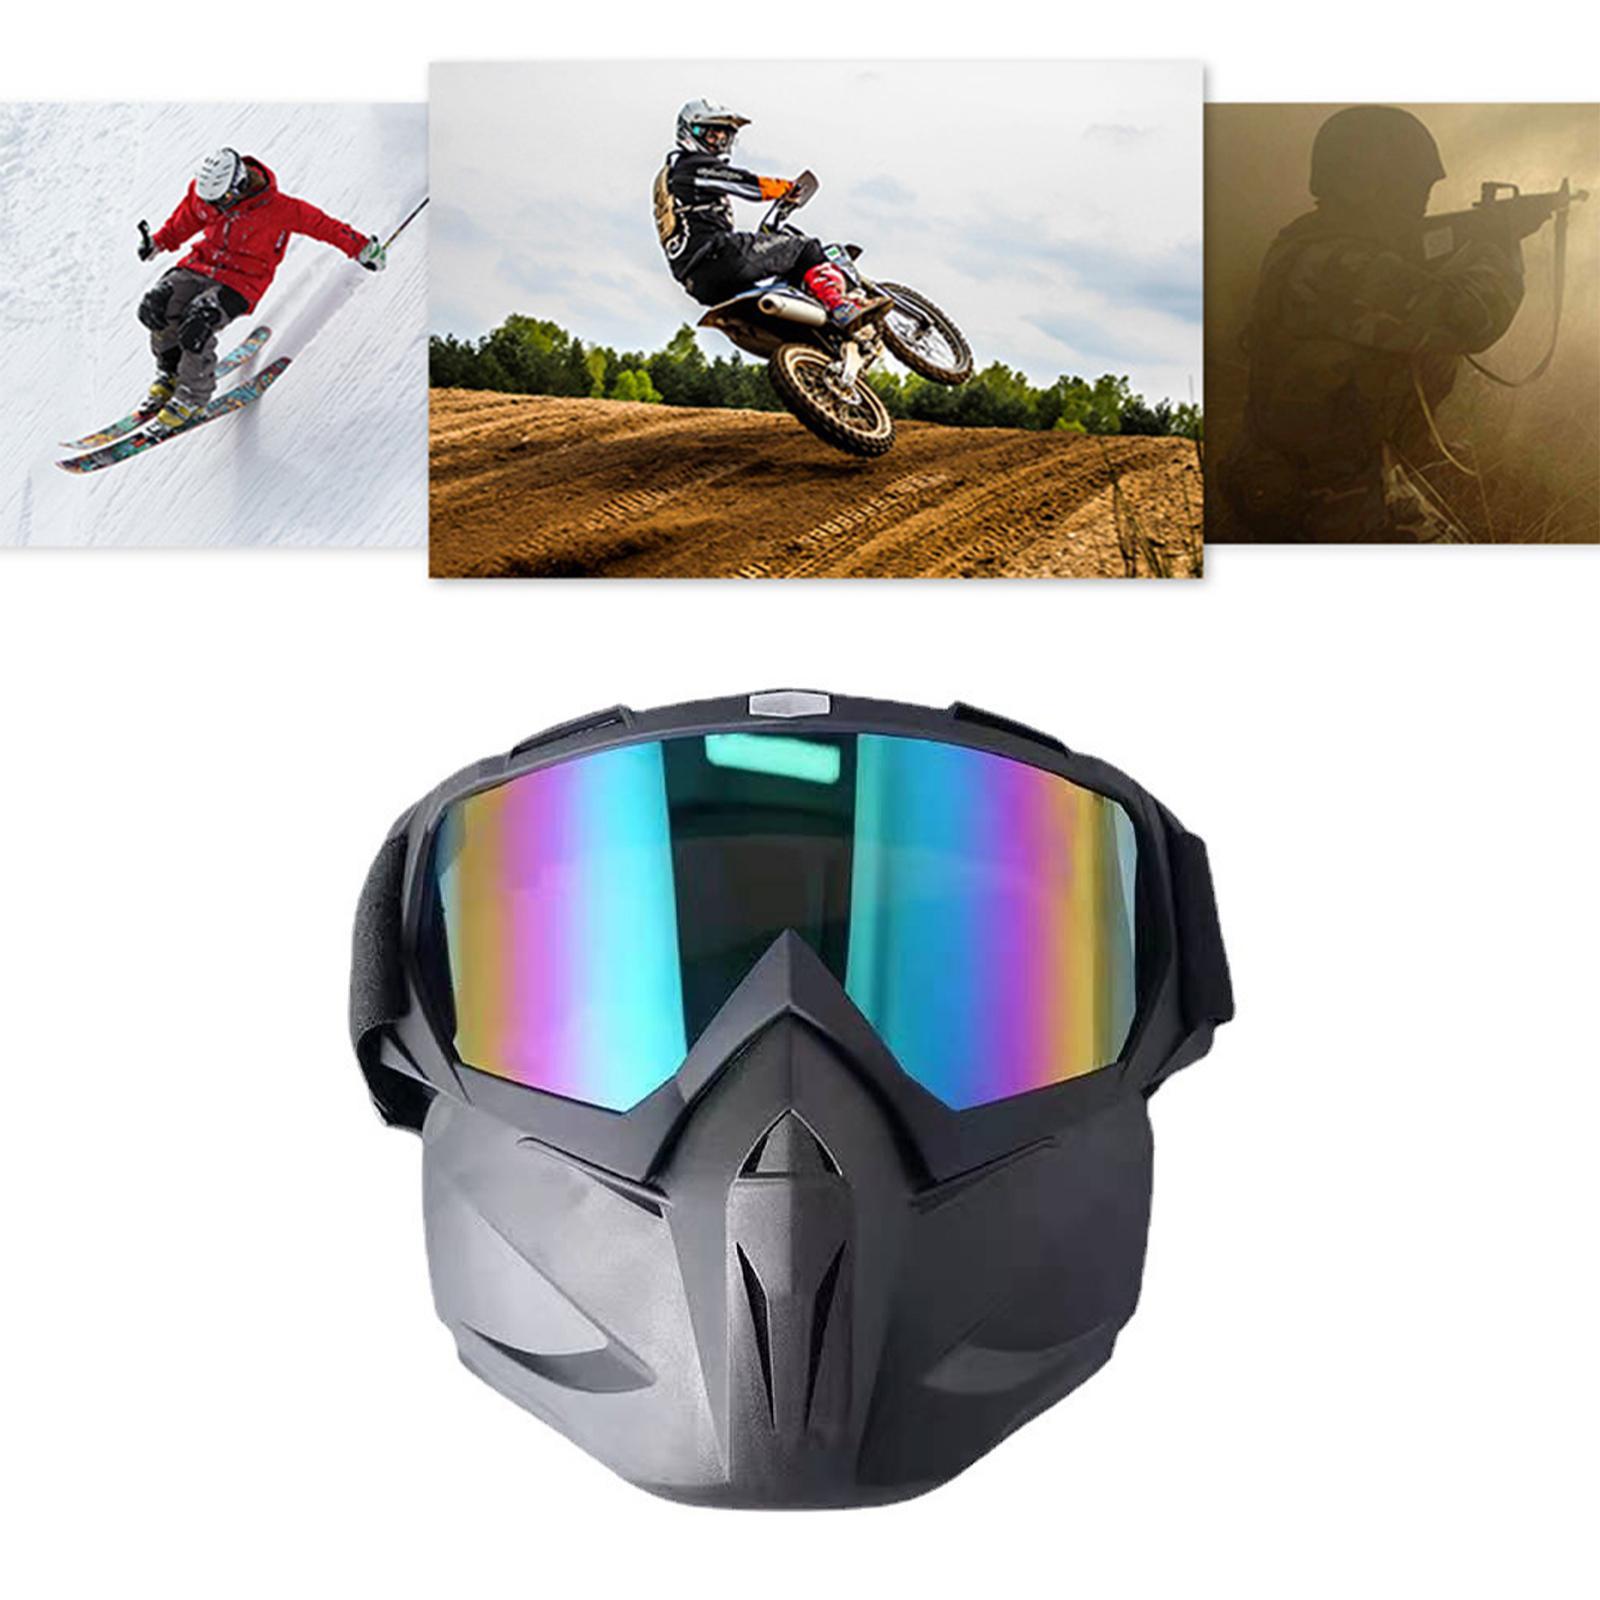 Motorcycle Goggles Mask with Detachable Mask Anti UV Adjustable Glasses Fit for Riding